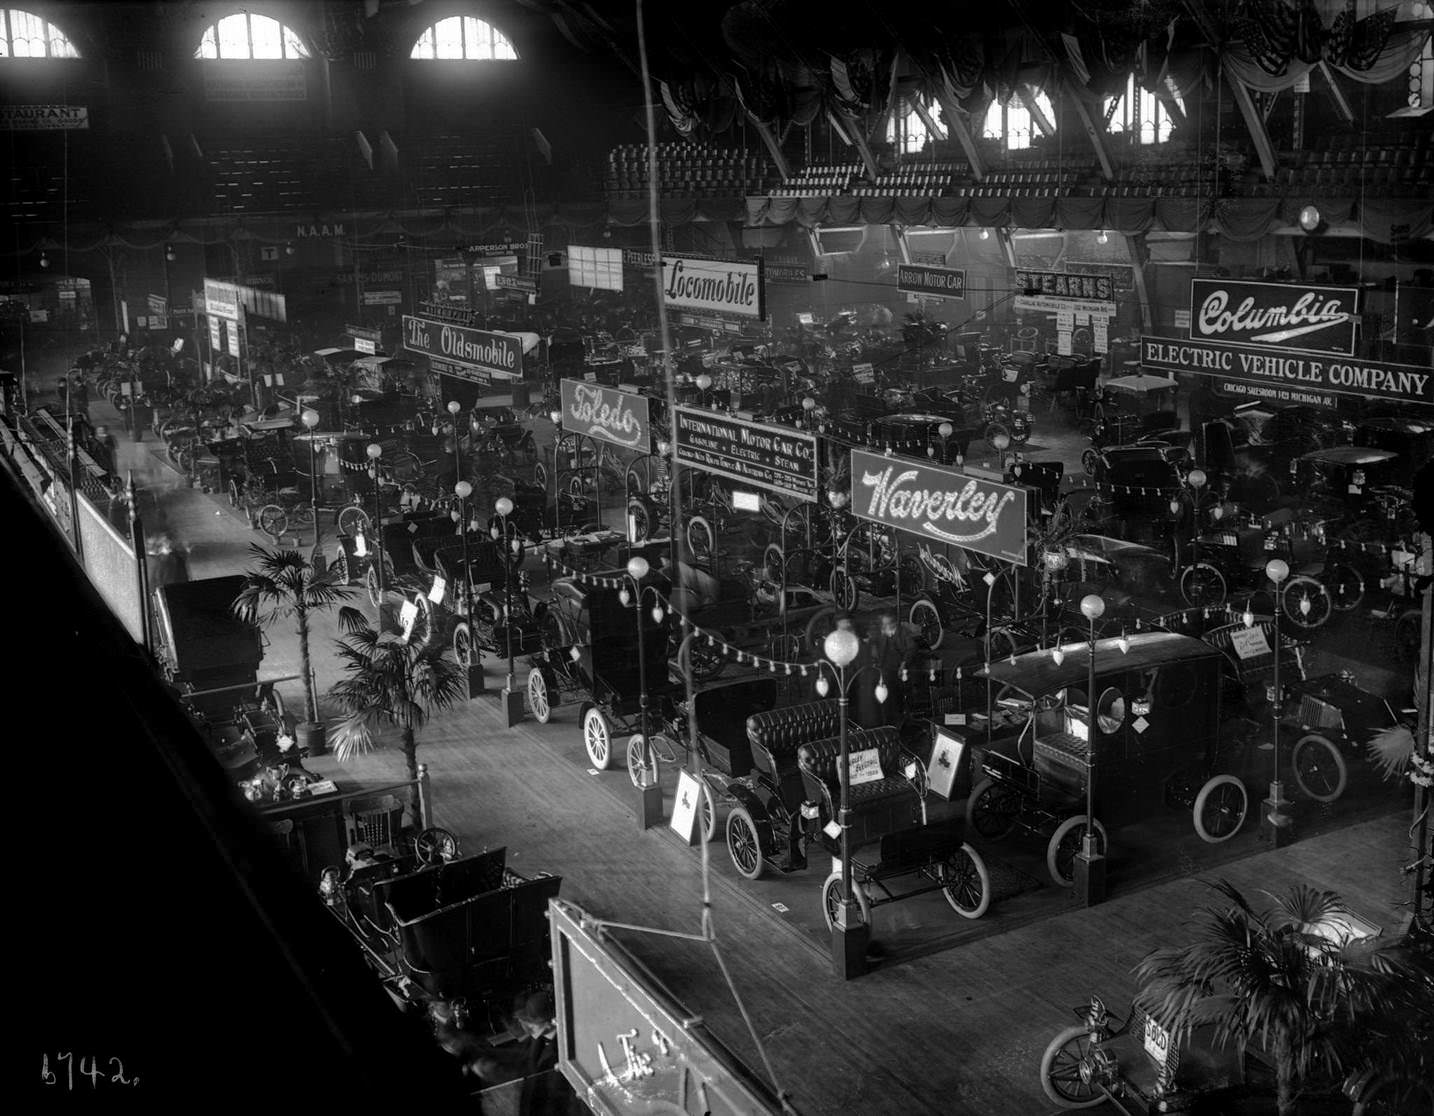 A view of the floor at the Chicago Automobile Show, Chicago, 1910s